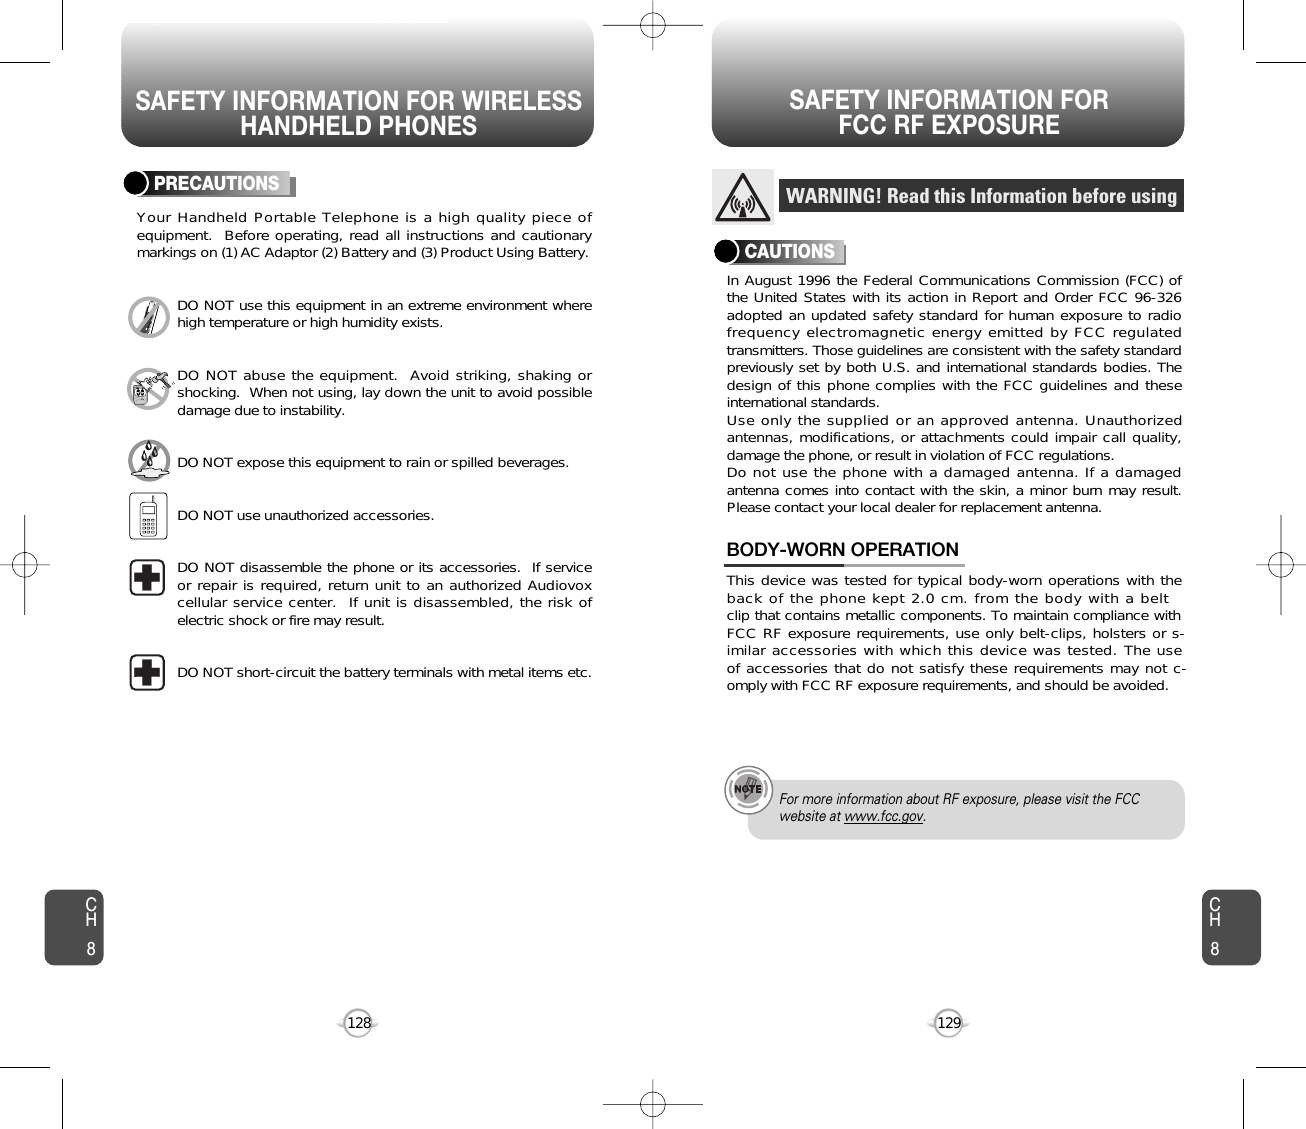 SAFETY INFORMATION FOR WIRELESSHANDHELD PHONESSAFETY INFORMATION FOR FCC RF EXPOSURE129128PRECAUTIONSYour Handheld Portable Telephone is a high quality piece ofequipment.  Before operating, read all instructions and cautionarymarkings on (1) AC Adaptor (2) Battery and (3) Product Using Battery.DO NOT use this equipment in an extreme environment wherehigh temperature or high humidity exists.DO NOT abuse the equipment.  Avoid striking, shaking orshocking.  When not using, lay down the unit to avoid possibledamage due to instability.DO NOT expose this equipment to rain or spilled beverages.DO NOT use unauthorized accessories.DO NOT disassemble the phone or its accessories.  If serviceor repair is required, return unit to an authorized Audiovoxcellular service center.  If unit is disassembled, the risk ofelectric shock or fire may result.DO NOT short-circuit the battery terminals with metal items etc.In August 1996 the Federal Communications Commission (FCC) ofthe United States with its action in Report and Order FCC 96-326adopted an updated safety standard for human exposure to radiofrequency electromagnetic energy emitted by FCC regulatedtransmitters. Those guidelines are consistent with the safety standardpreviously set by both U.S. and international standards bodies. Thedesign of this phone complies with the FCC guidelines and theseinternational standards.Use only the supplied or an approved antenna. Unauthorizedantennas, modifications, or attachments could impair call quality,damage the phone, or result in violation of FCC regulations.Do not use the phone with a damaged antenna. If a damagedantenna comes into contact with the skin, a minor burn may result.Please contact your local dealer for replacement antenna.This device was tested for typical body-worn operations with theback of the phone kept 2.0 cm. from the body with a belt clip that contains metallic components. To maintain compliance with FCC RF exposure requirements, use only belt-clips, holsters or s-imilar accessories with which this device was tested. The useof accessories that do not satisfy these requirements may not c-omply with FCC RF exposure requirements, and should be avoided.BODY-WORN OPERATIONWARNING! Read this Information before usingCAUTIONSFor more information about RF exposure, please visit the FCCwebsite at www.fcc.gov.CH8CH8